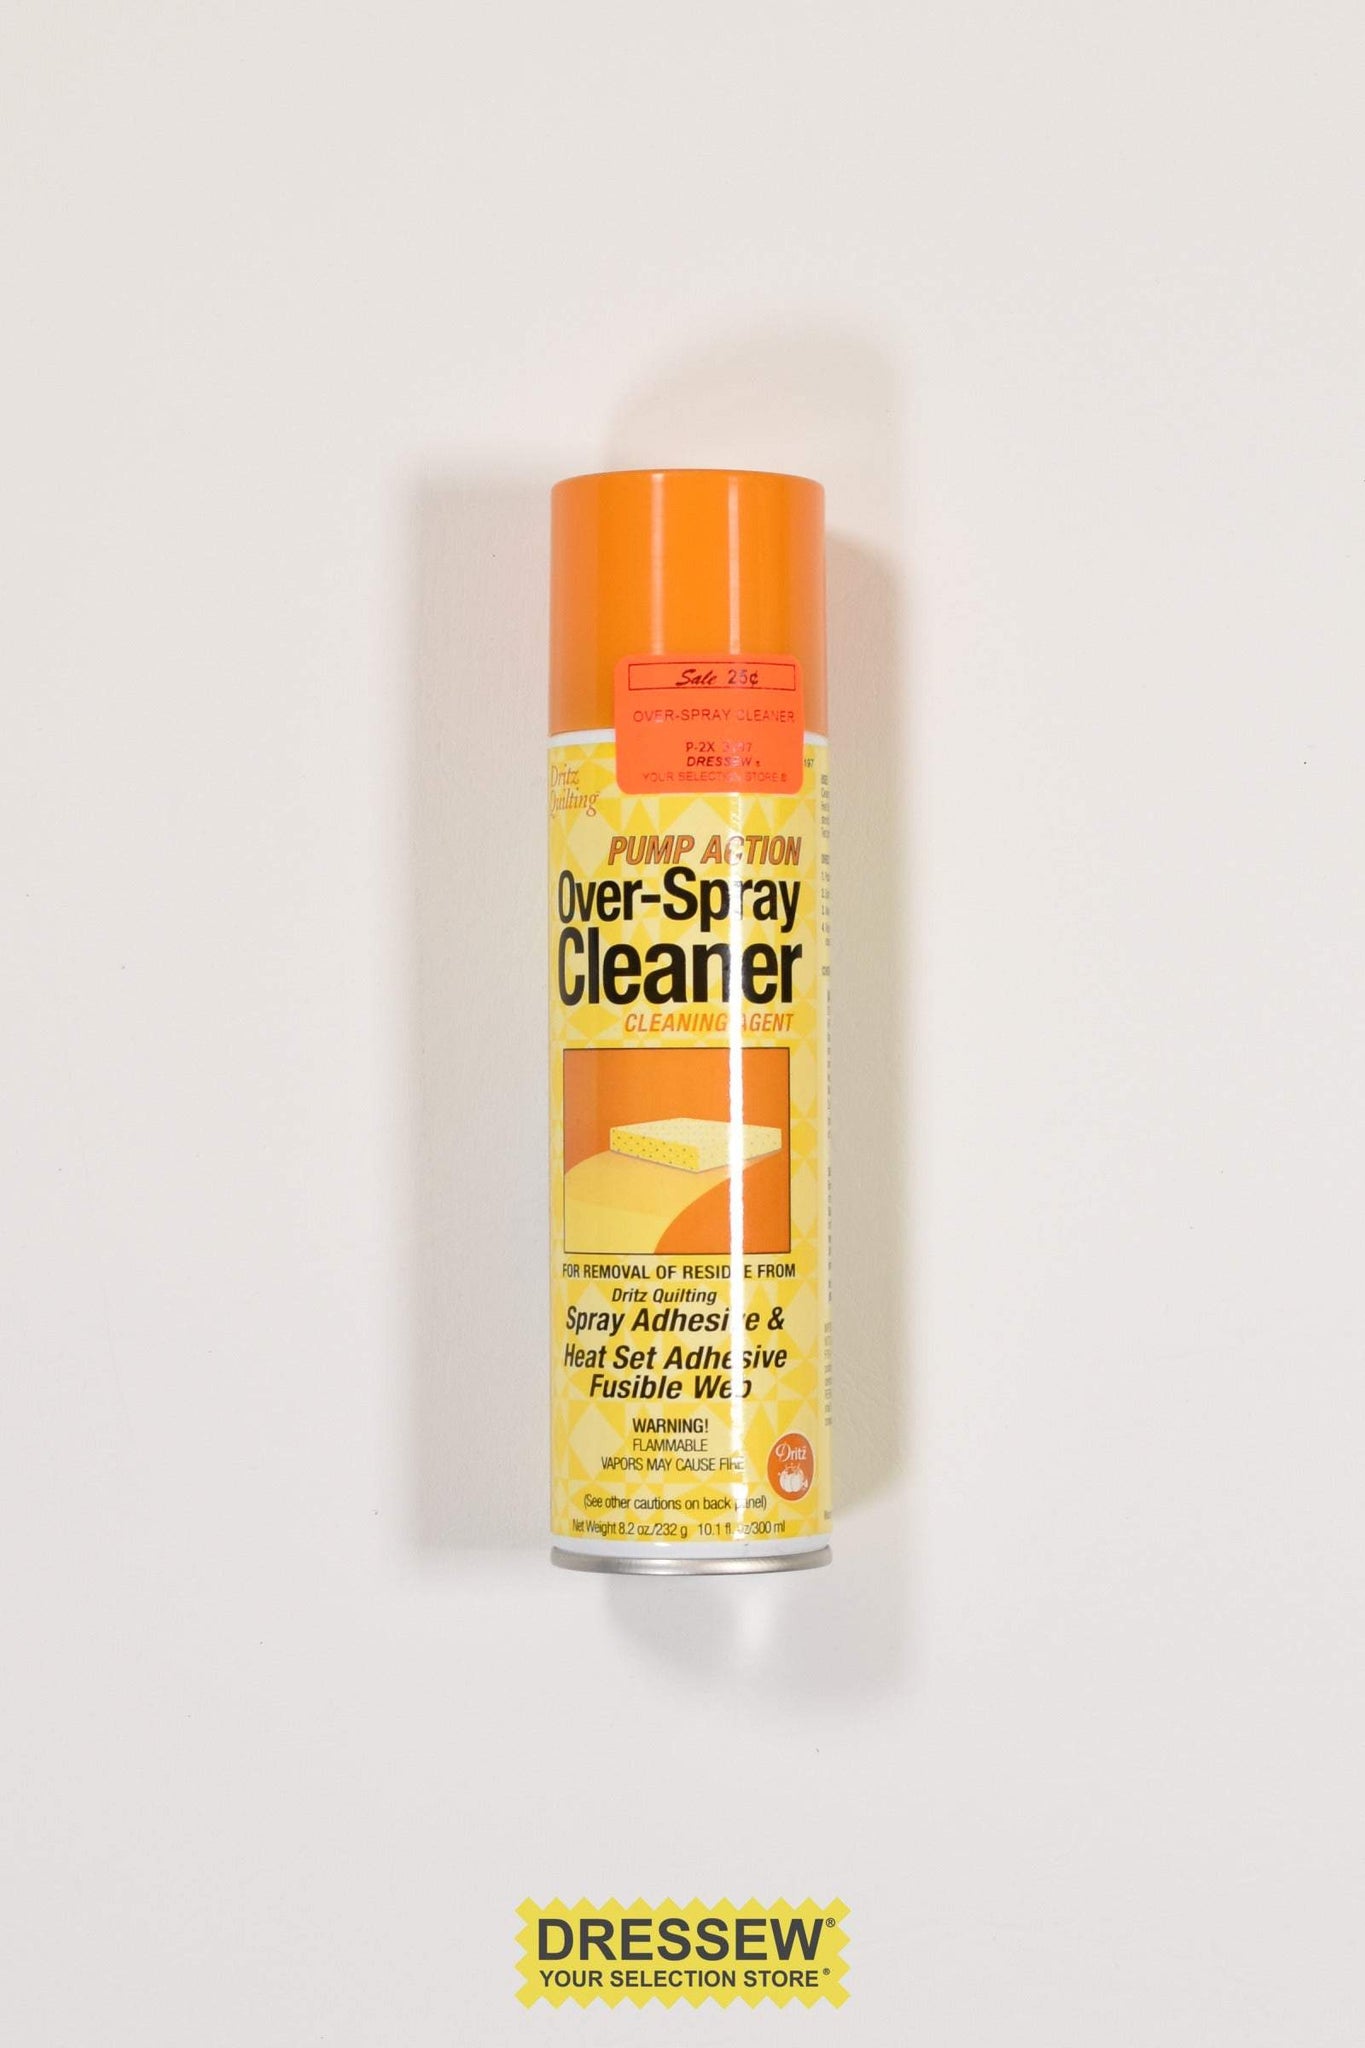 Over-Spray Cleaner